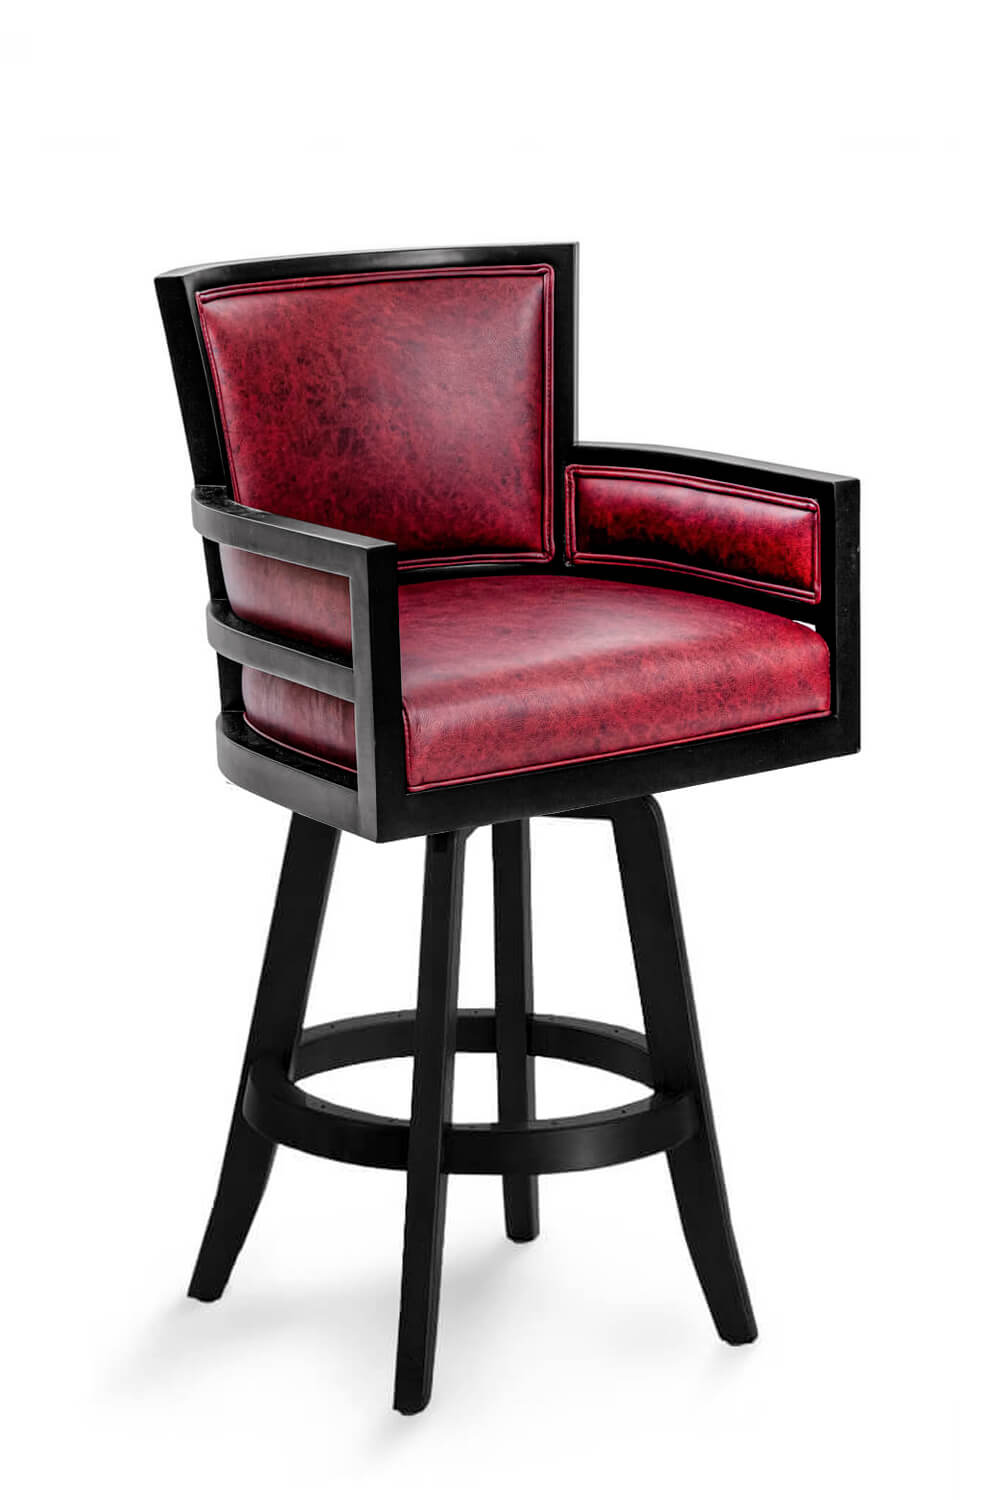 Metra Upholstered Wood Swivel Stool, Leather Counter Stools With Arms